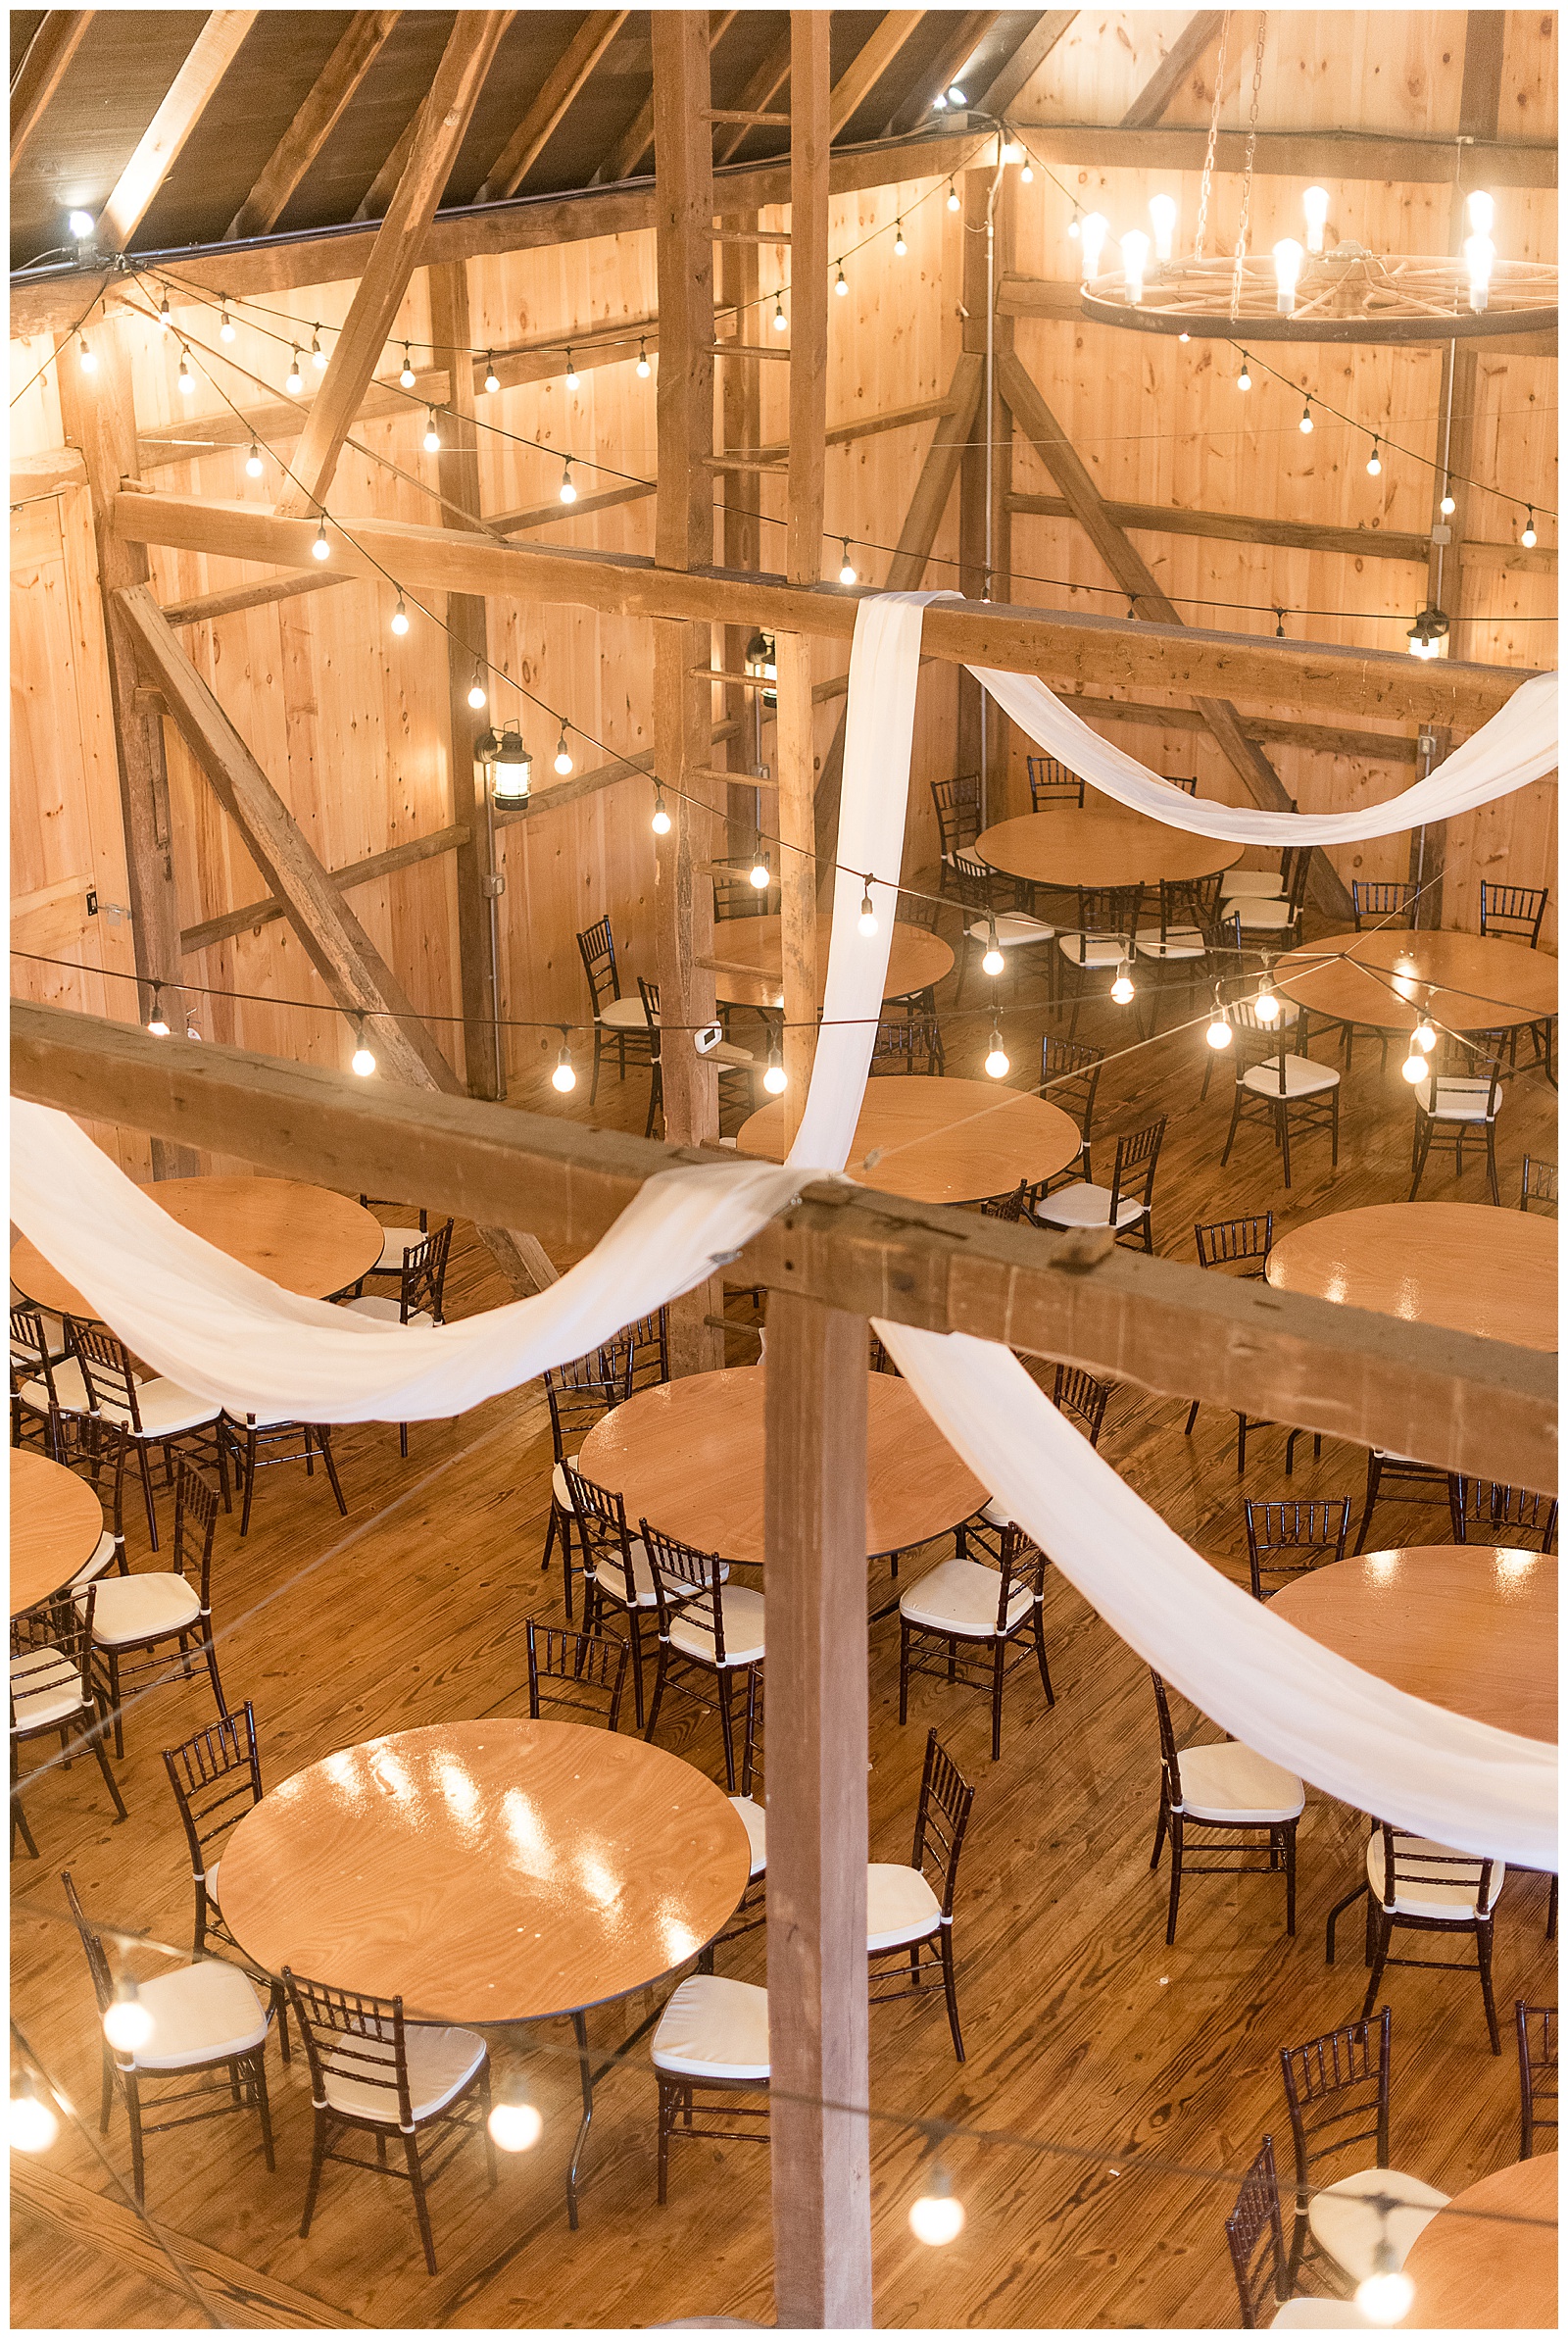 close up interior photo of rustic barn venue with angle of photo from higher up inside the barn looking down over the wooden rafters and stringed lights and draped fabric above the tables and chairs at Spring Valley Farms in Dover, PA